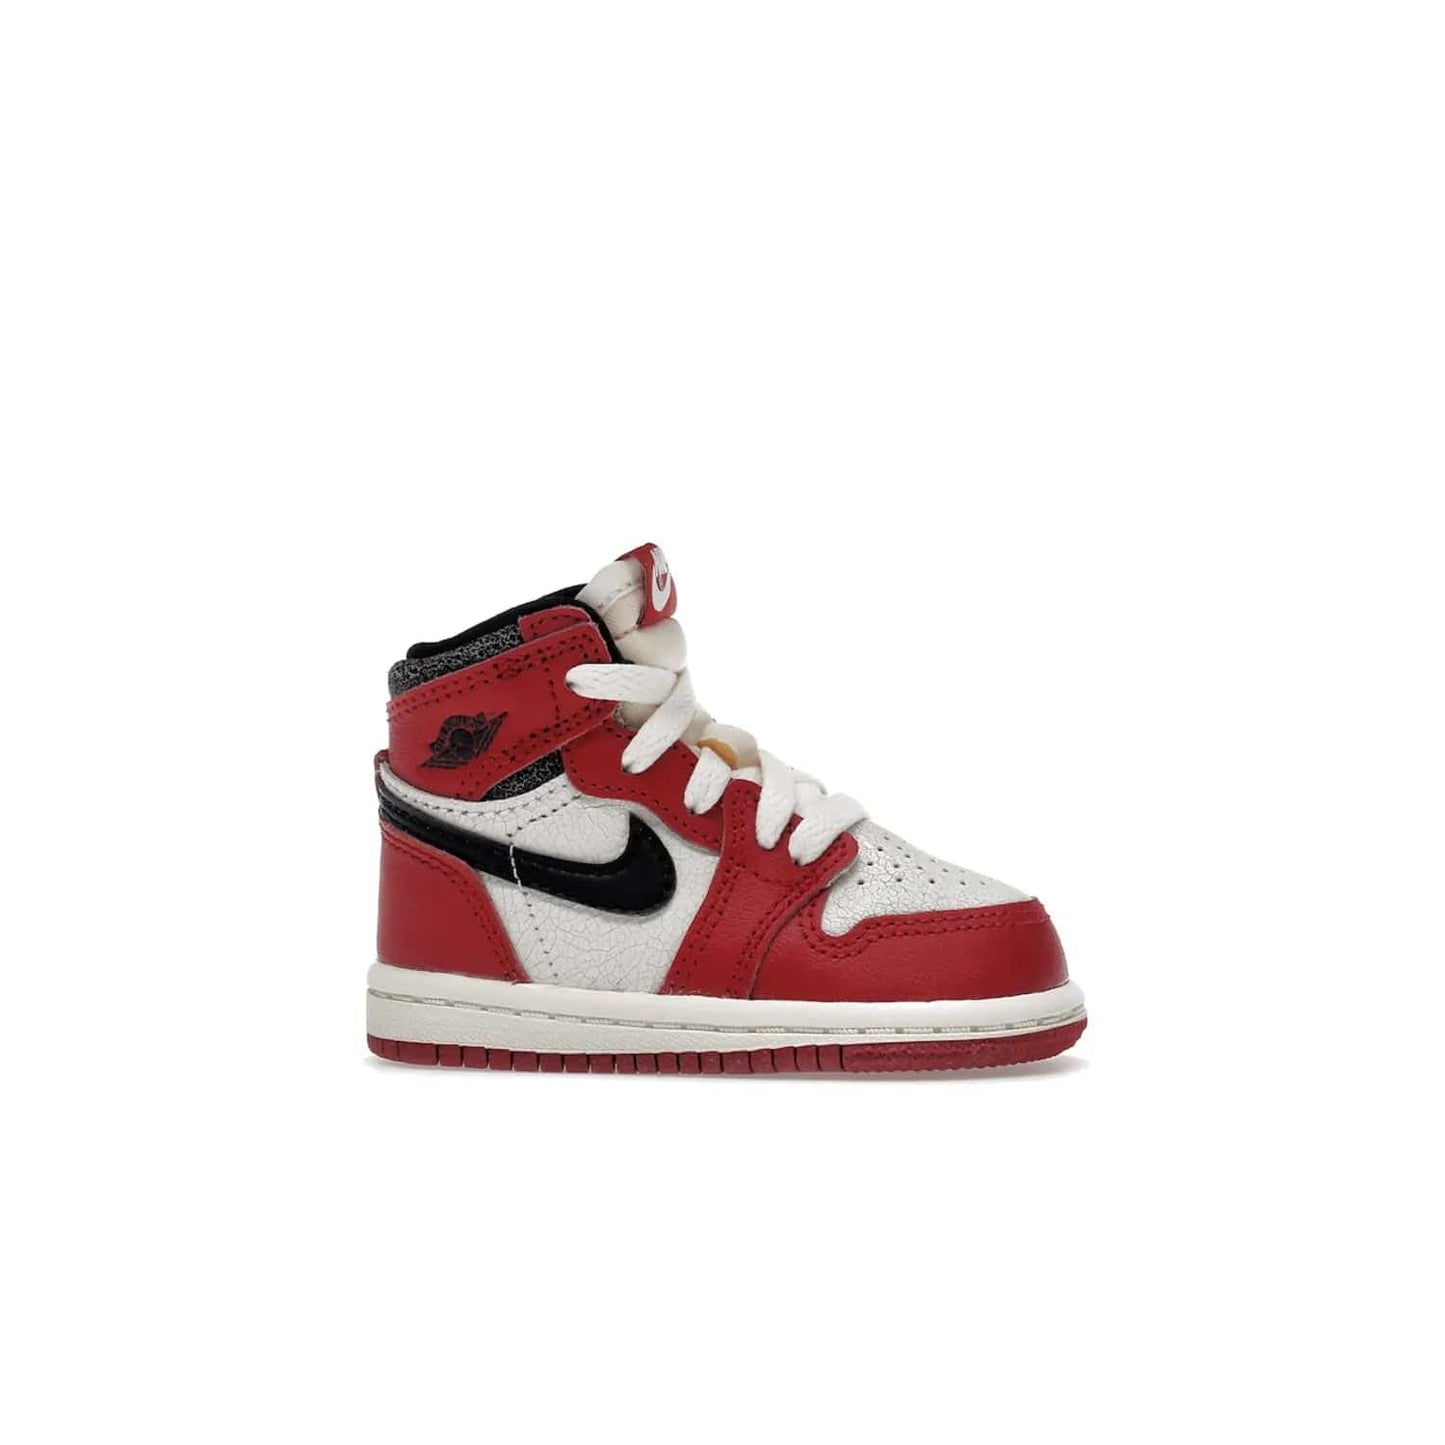 Jordan 1 Retro High OG Chicago Lost and Found (TD) - Image 2 - Only at www.BallersClubKickz.com - Introducing the Air Jordan 1 Retro High OG Lost and Found TD – a vibrant combination of 4 colors: muslin, varsity, sail and black. Featuring a crackled leather upper and AIR units for comfort and a signature Wings logo, these retro shoes add comfort and style for your little ones at $70. Get your pair before 19th December 2022!